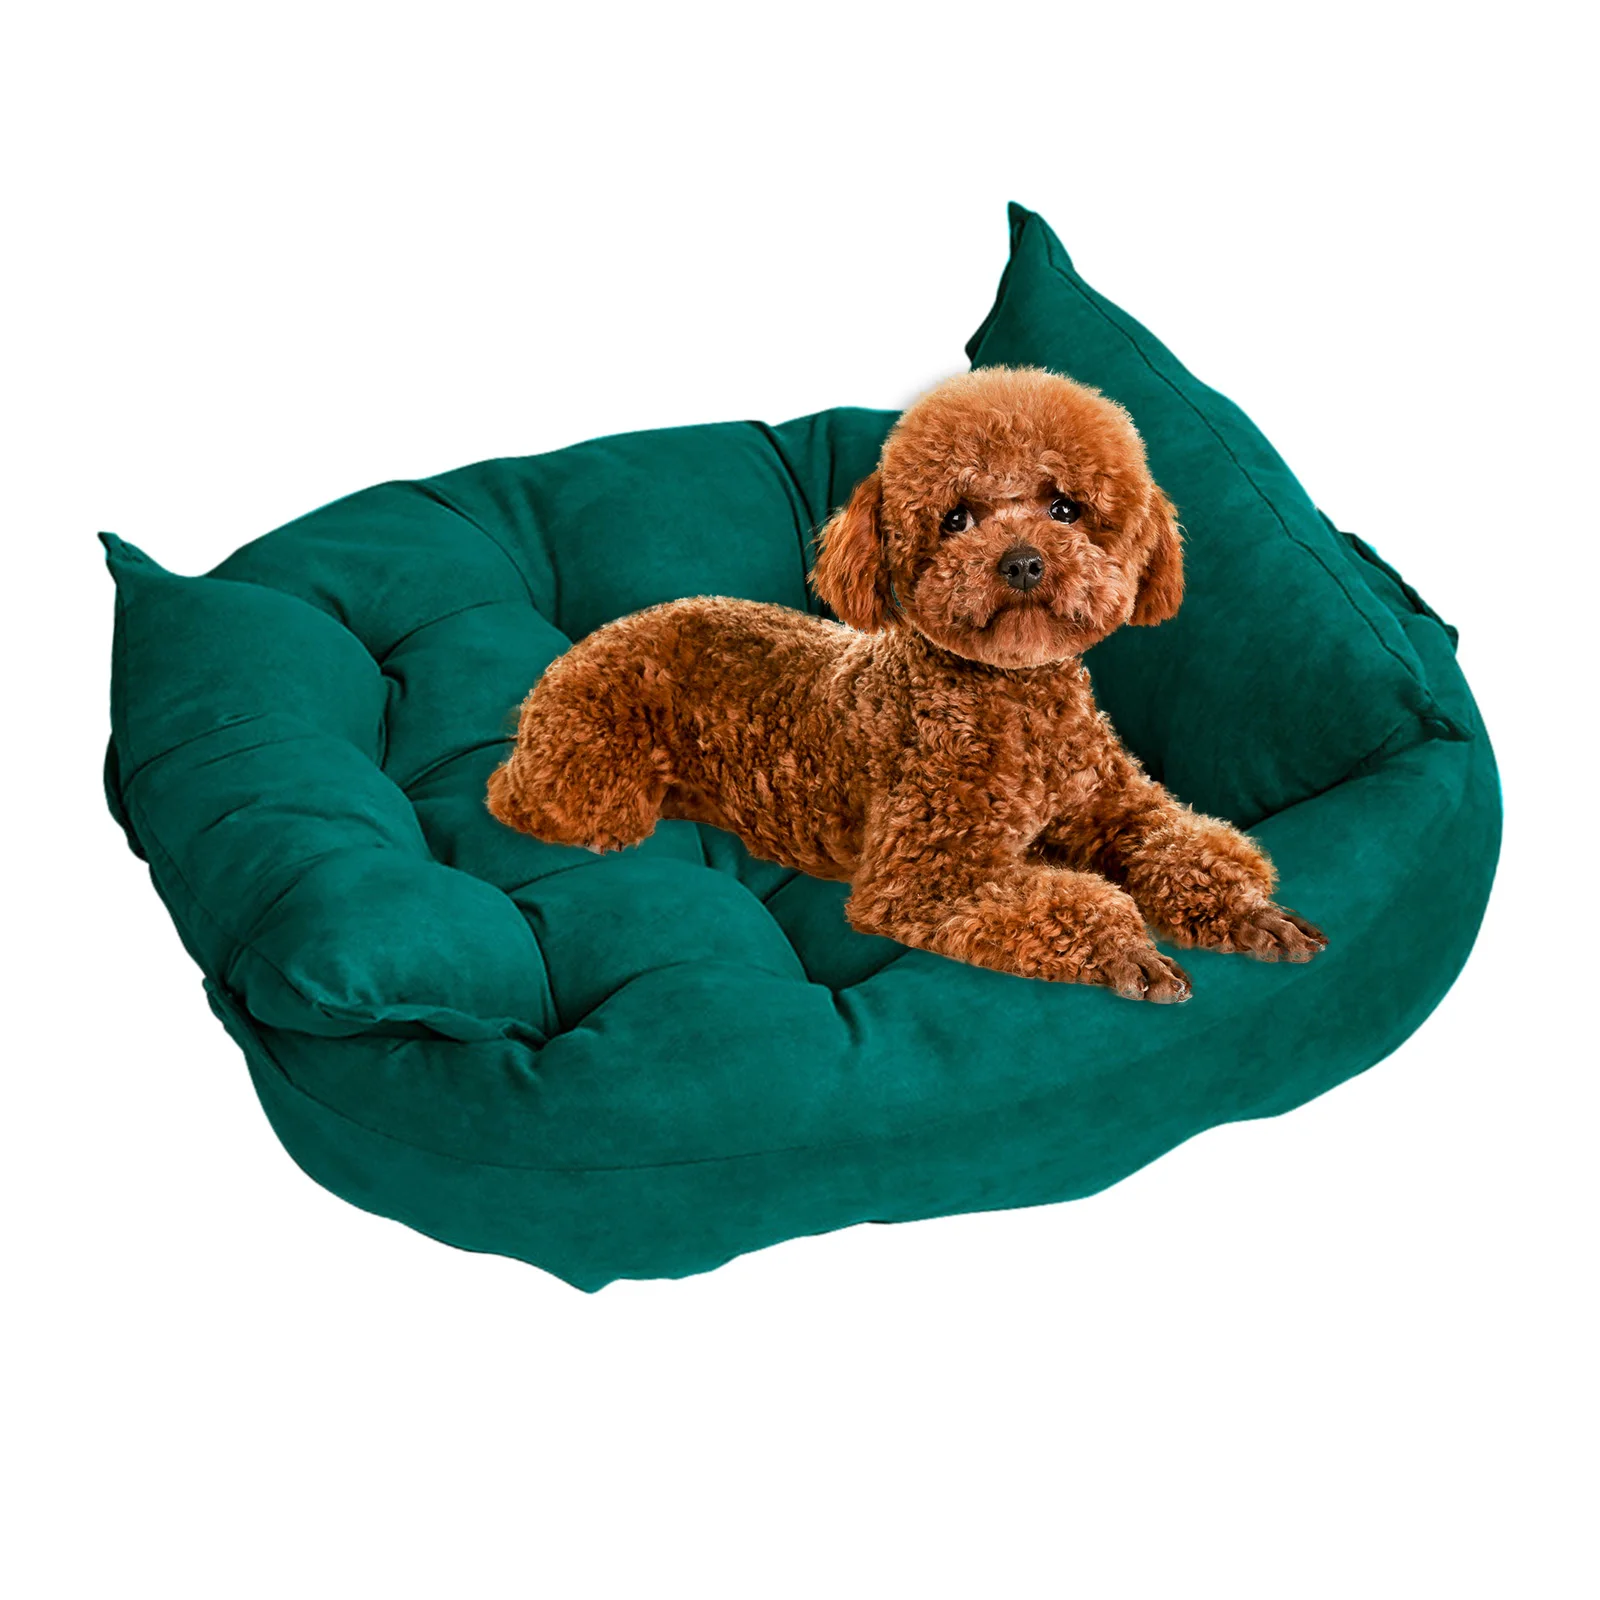 Cat Dog Beds Soft Pet Bedding Four Seasons Warm Sleeping Bed House Nest for Small Medium Dogs Cat Cozy Dog House Nest Cushion